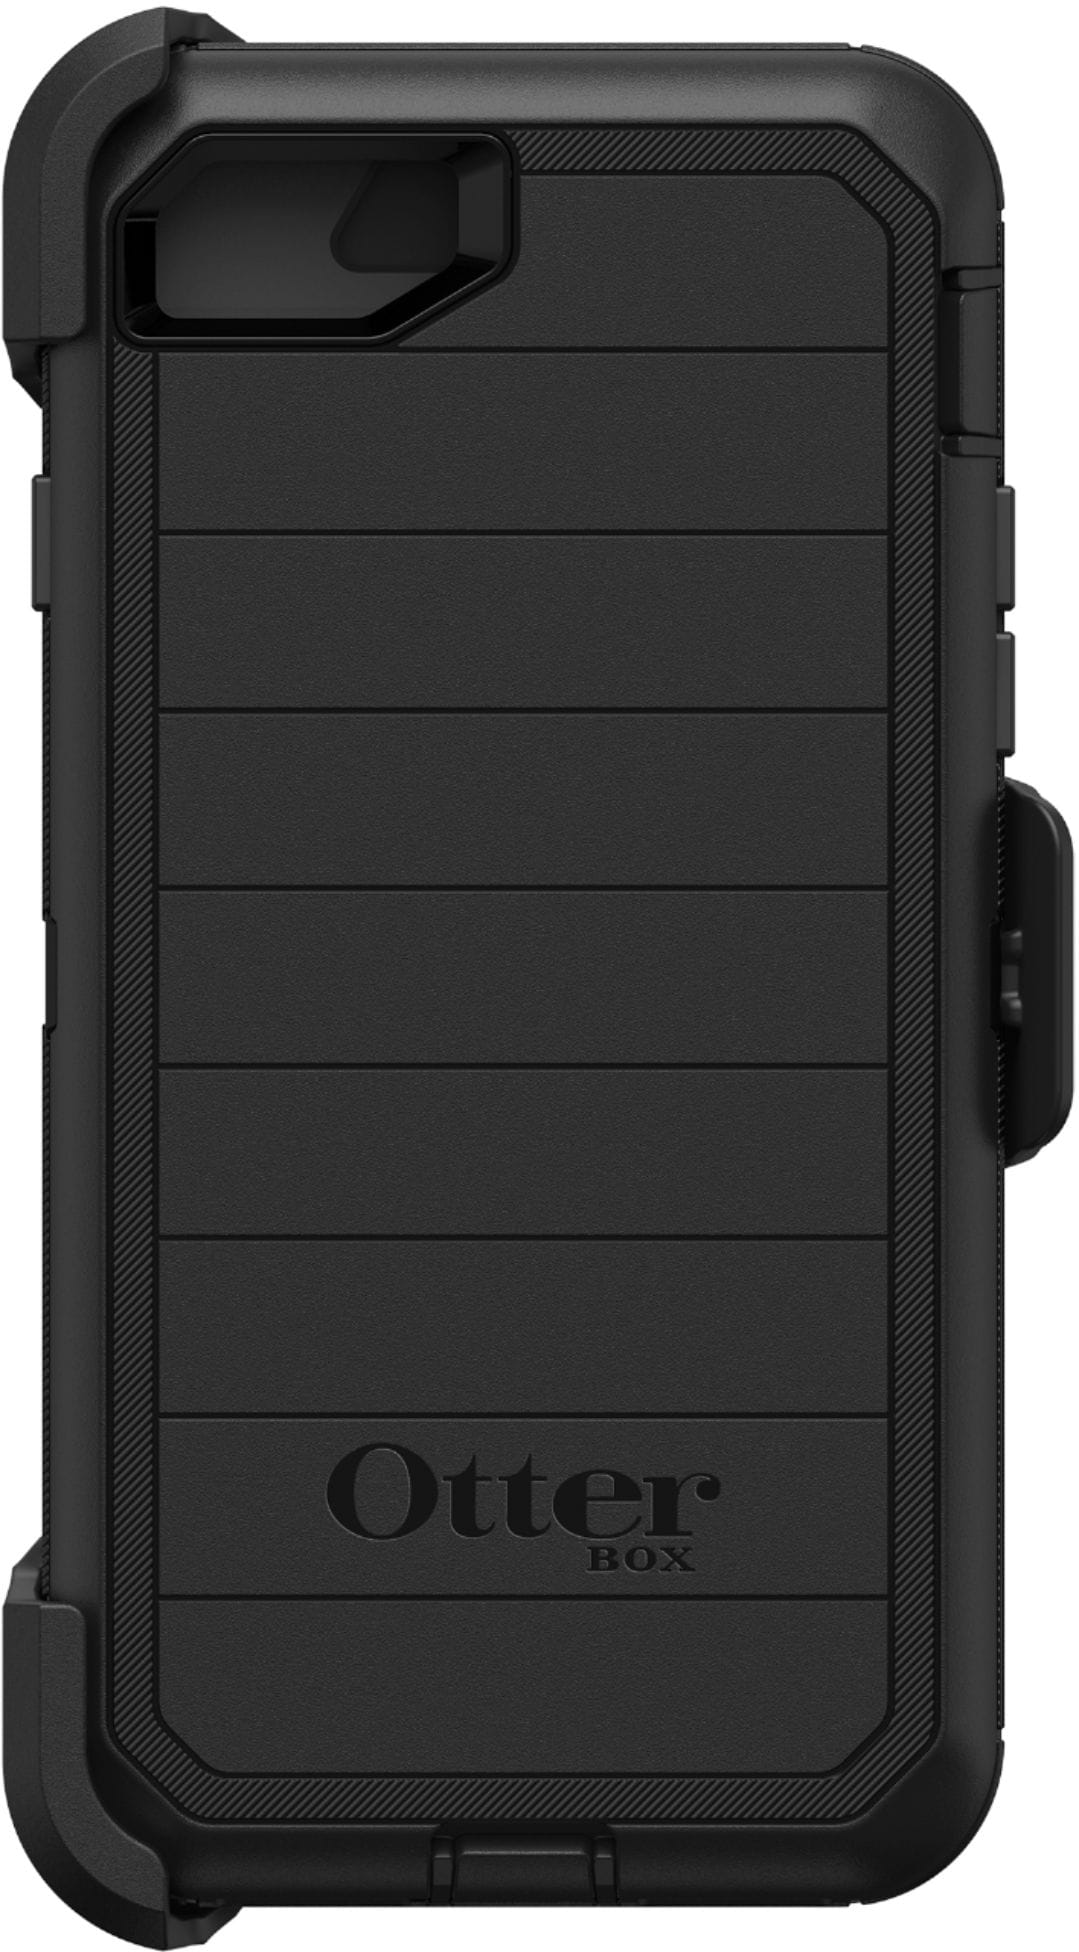 OtterBox - Defender Series Pro Hard Shell Case for Apple iPhone 7, 8 and SE (2nd generation) - Black_7